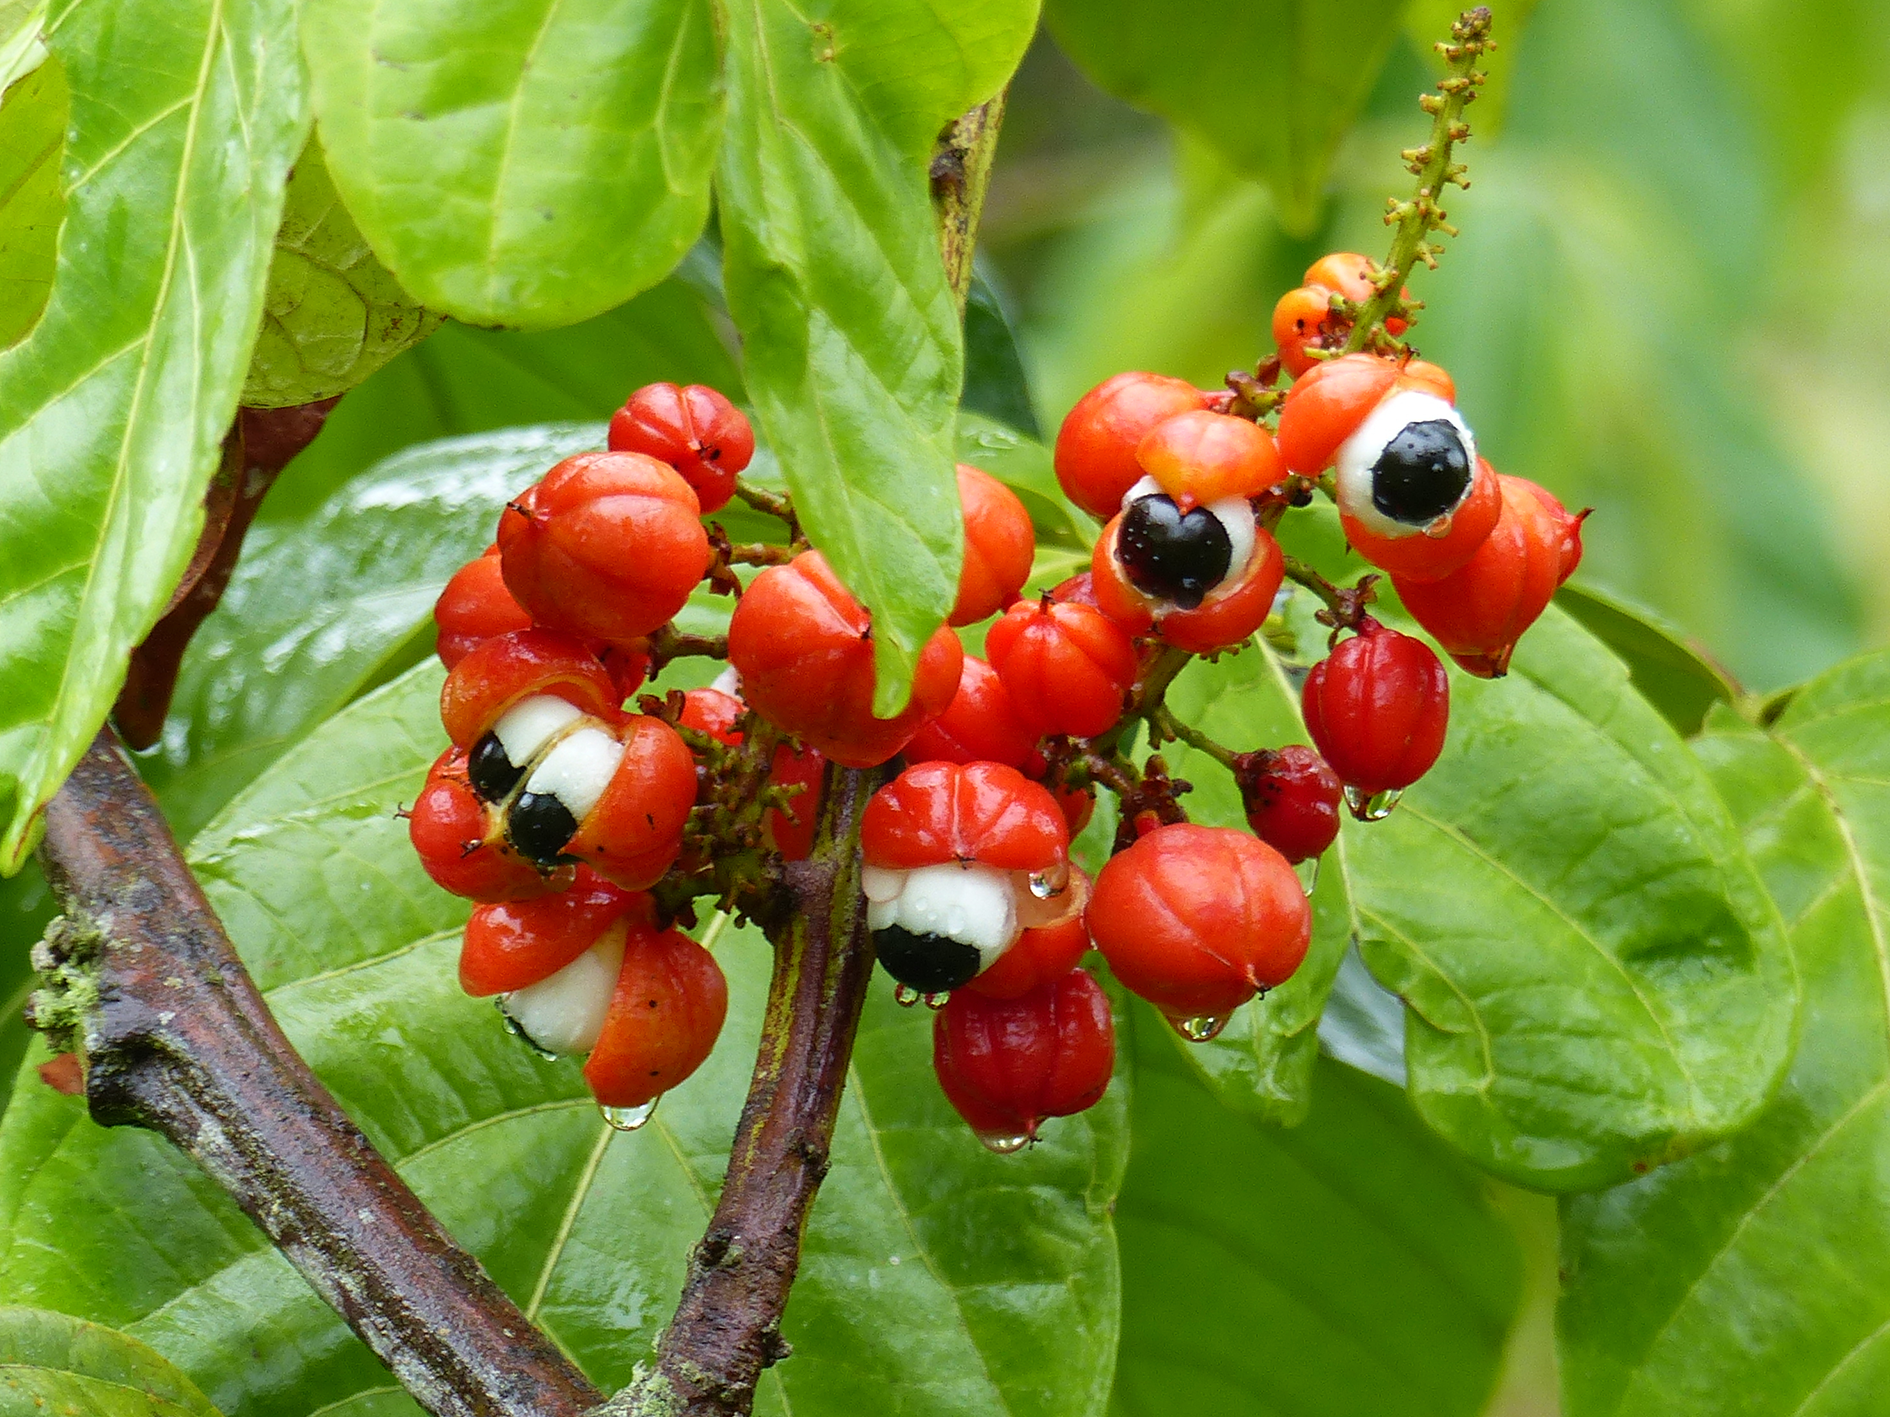 Where Does Guarana Come From and What Are the Benefits?